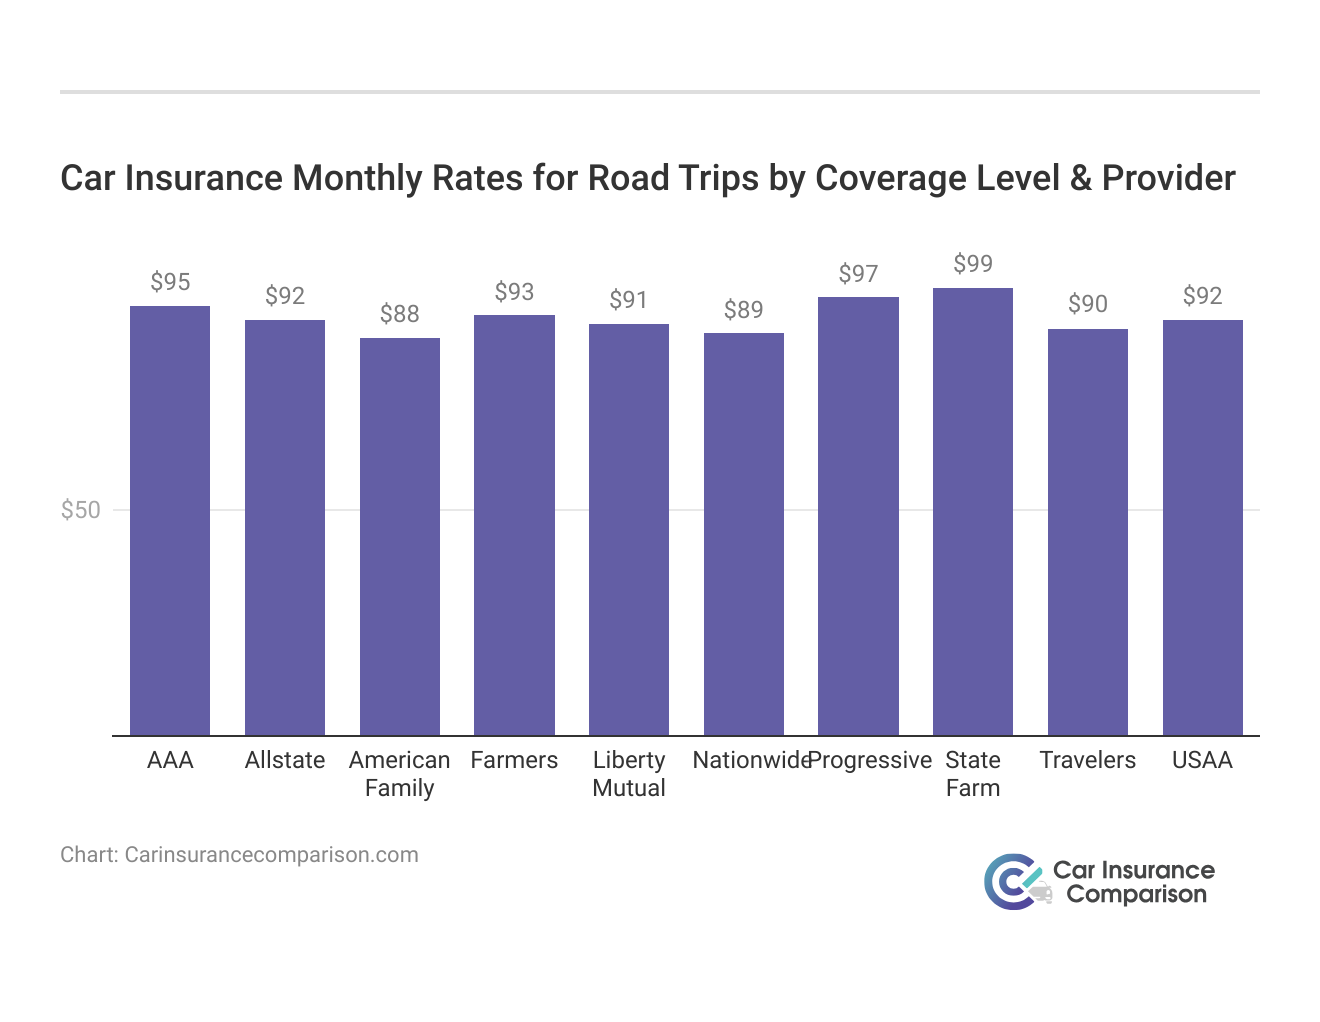 <h3>Car Insurance Monthly Rates for Road Trips by Coverage Level & Provider</h3>